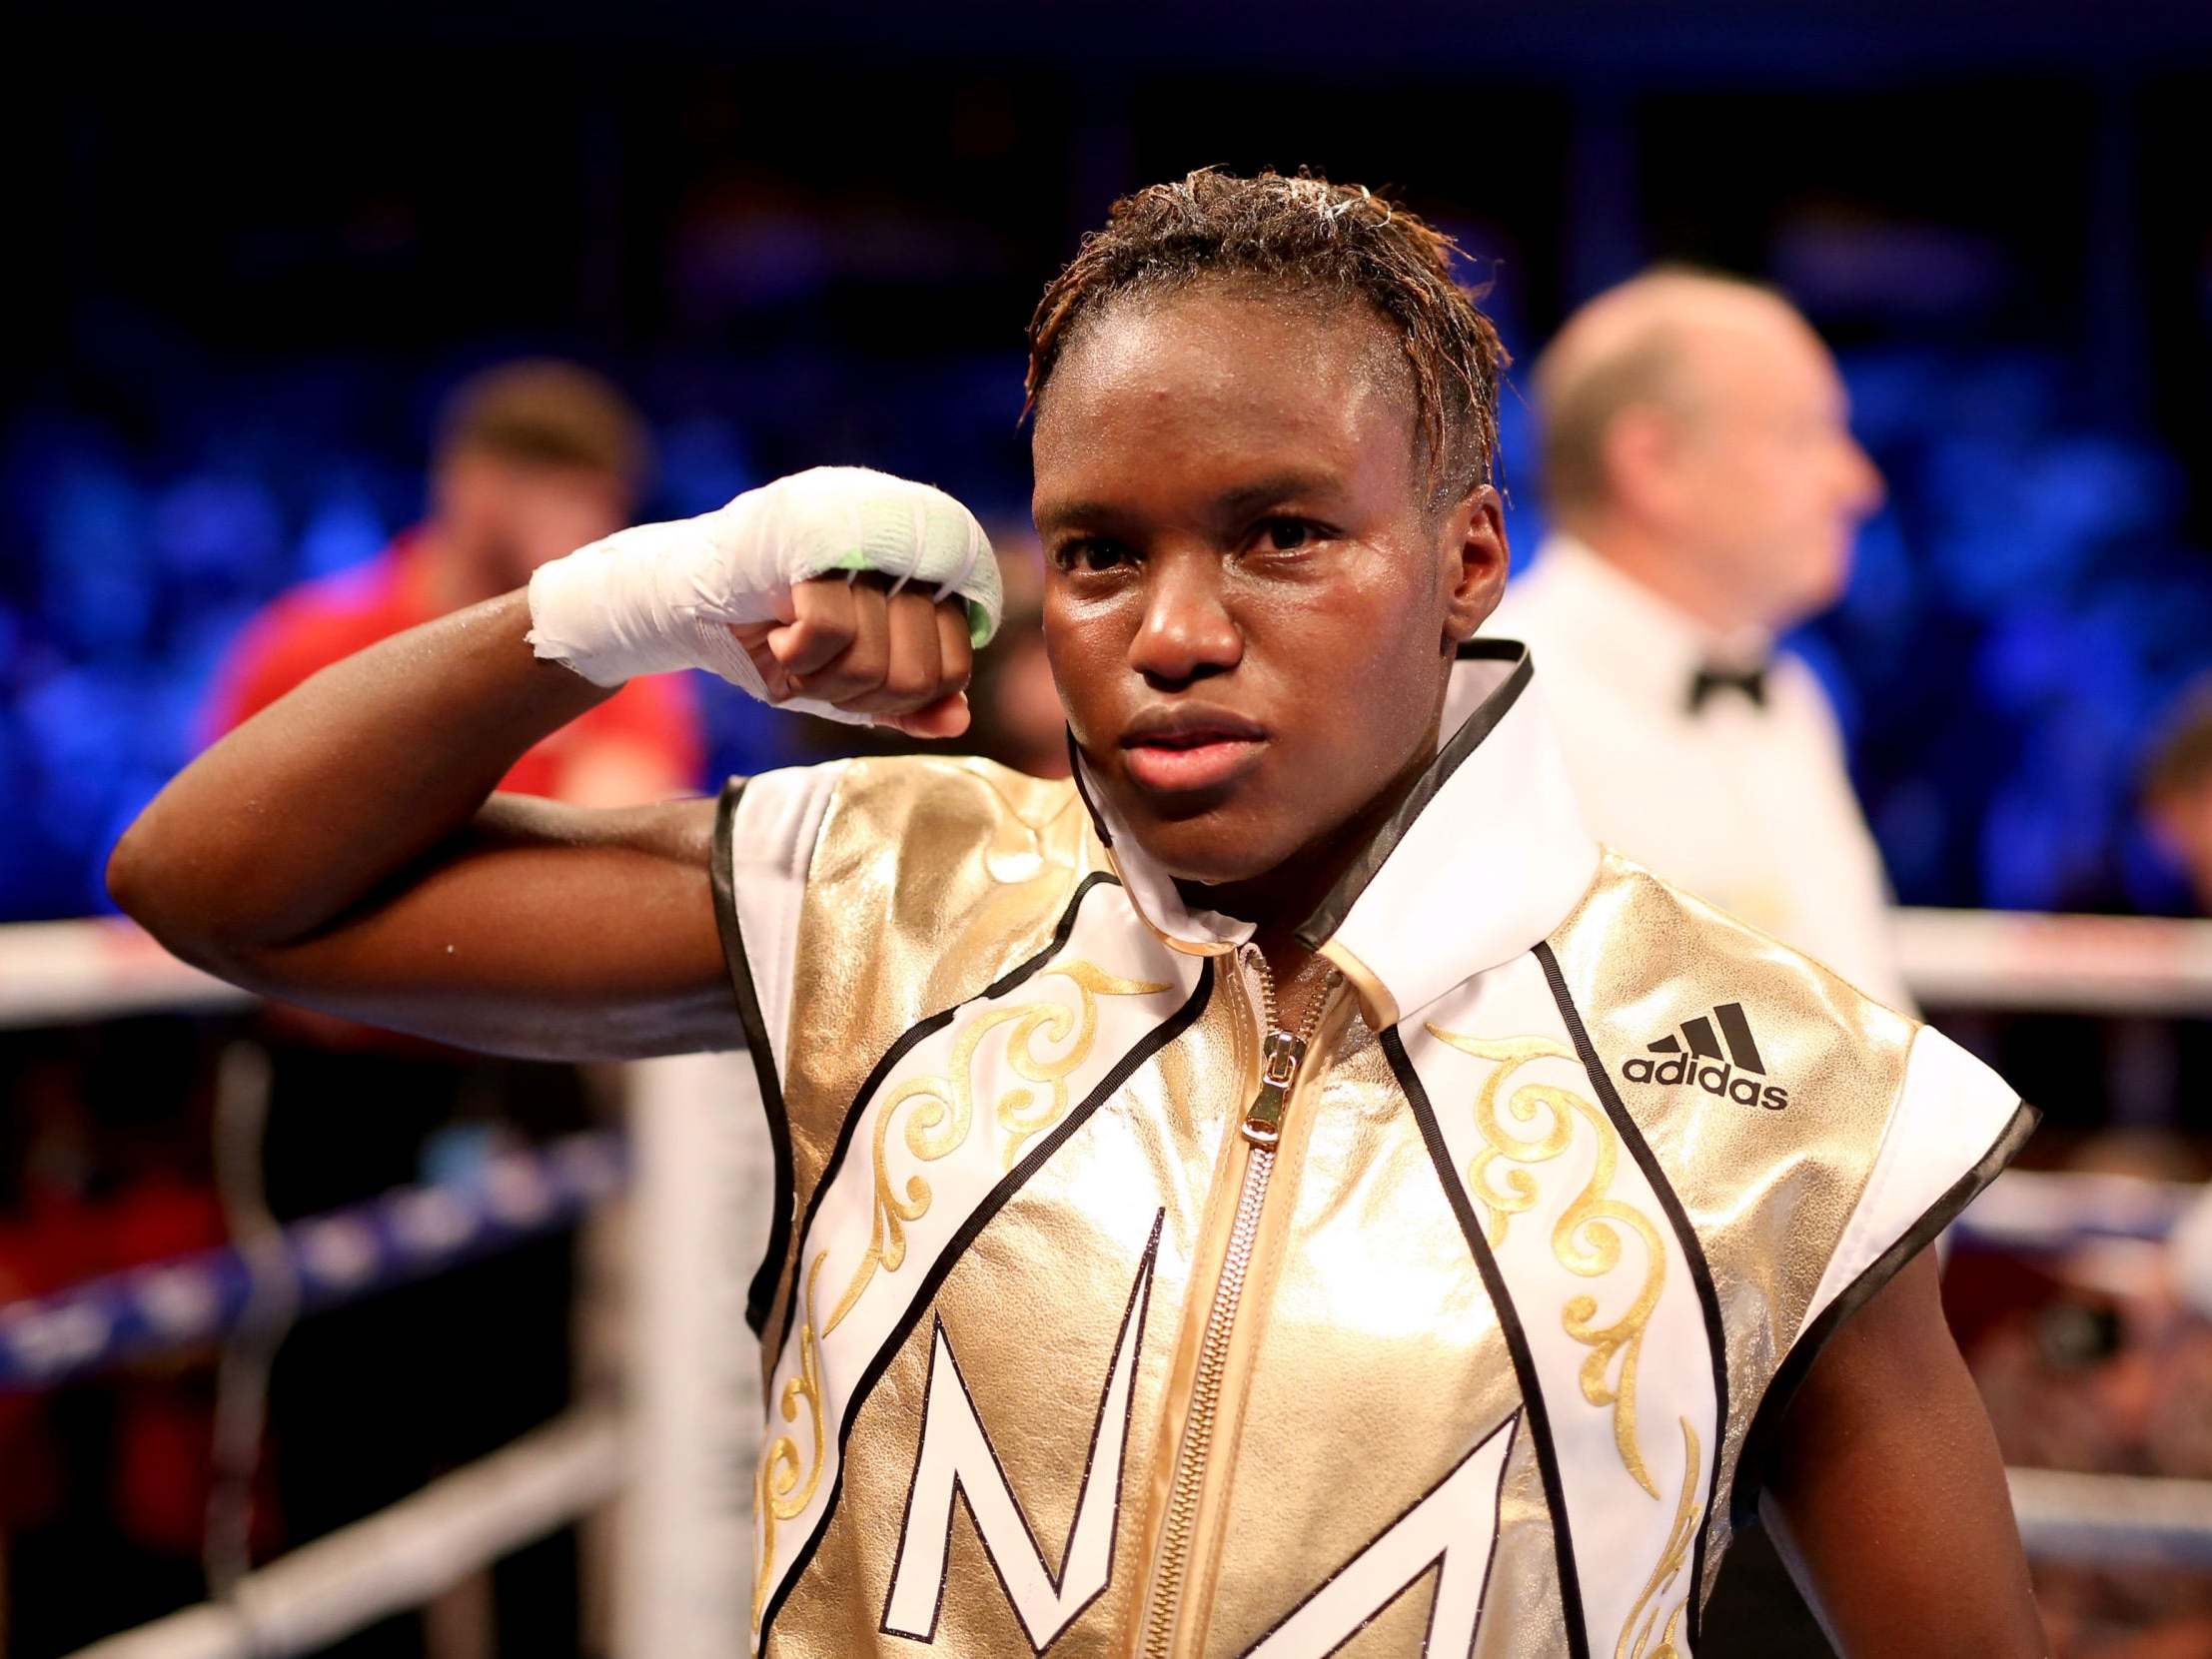 Nicola Adams retained her title after her fight with Maria Salinas was declared a draw